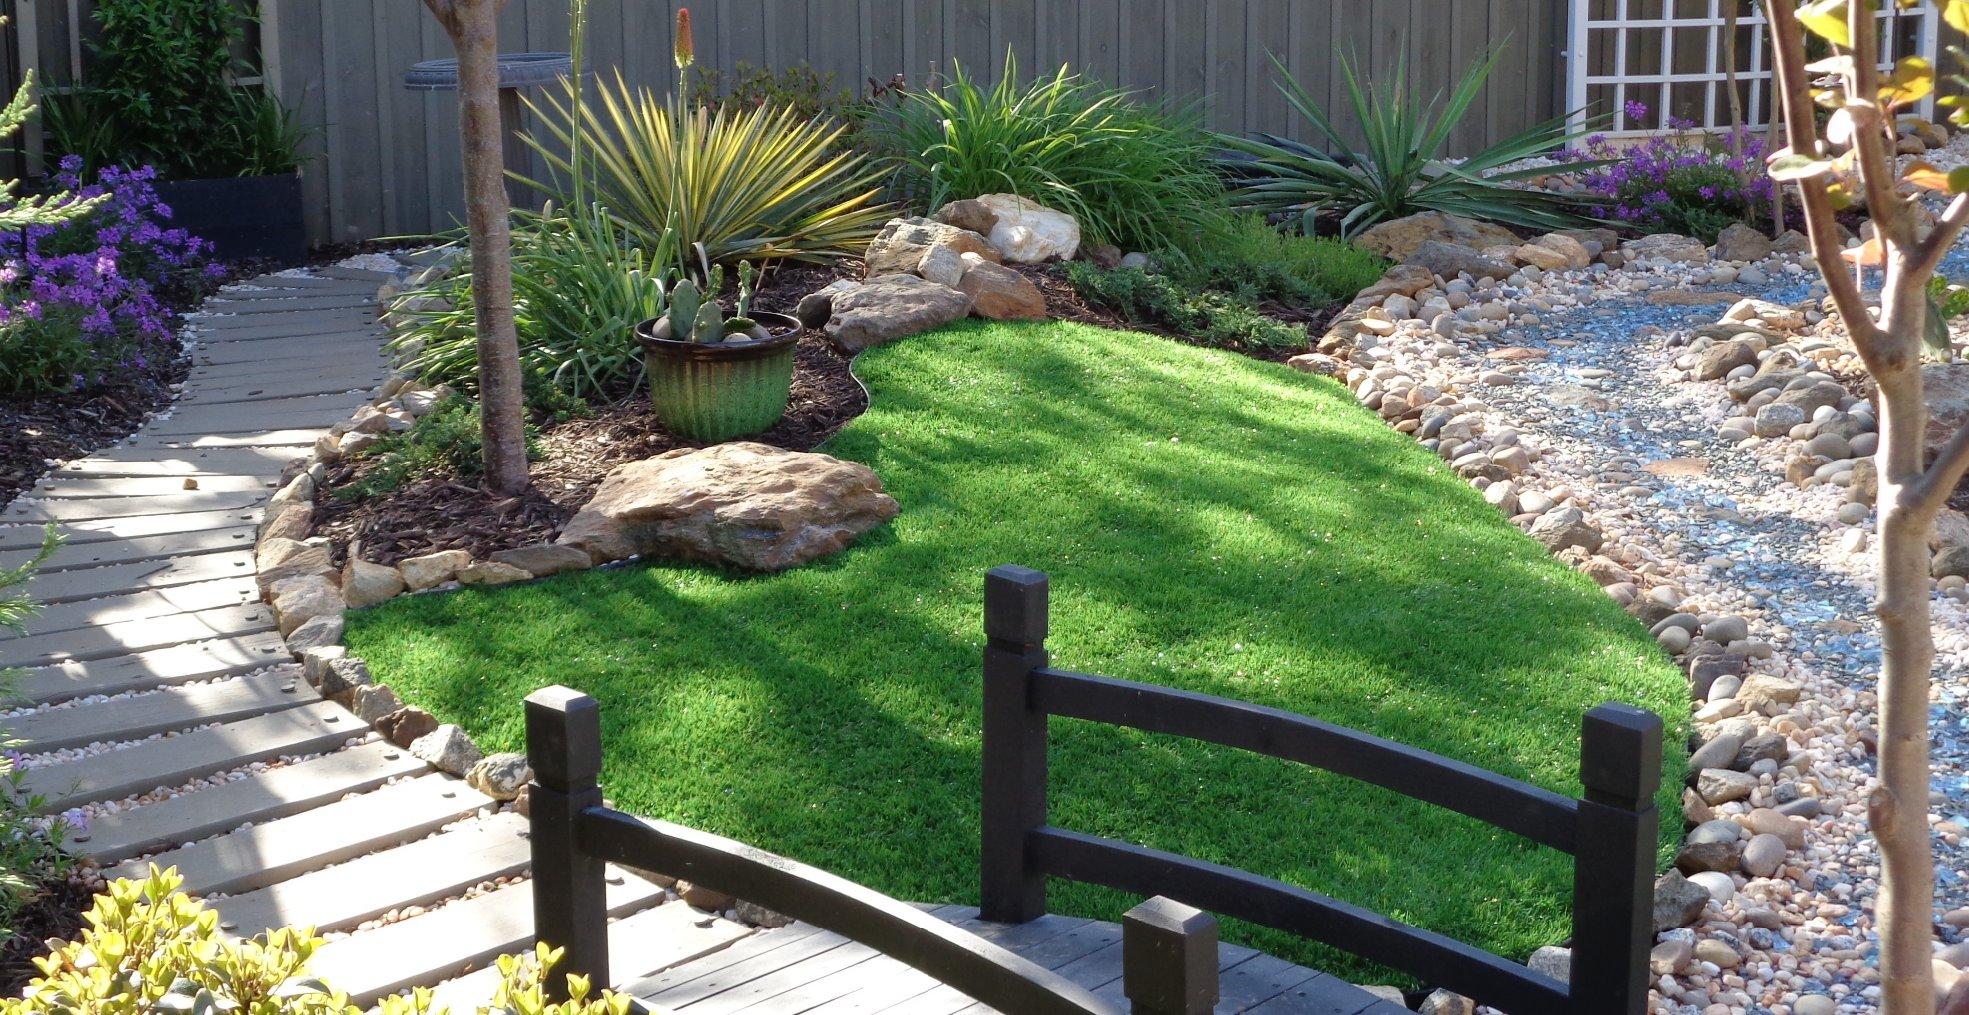 How to Choose the Best Artificial Turf for Your Home? - LITA